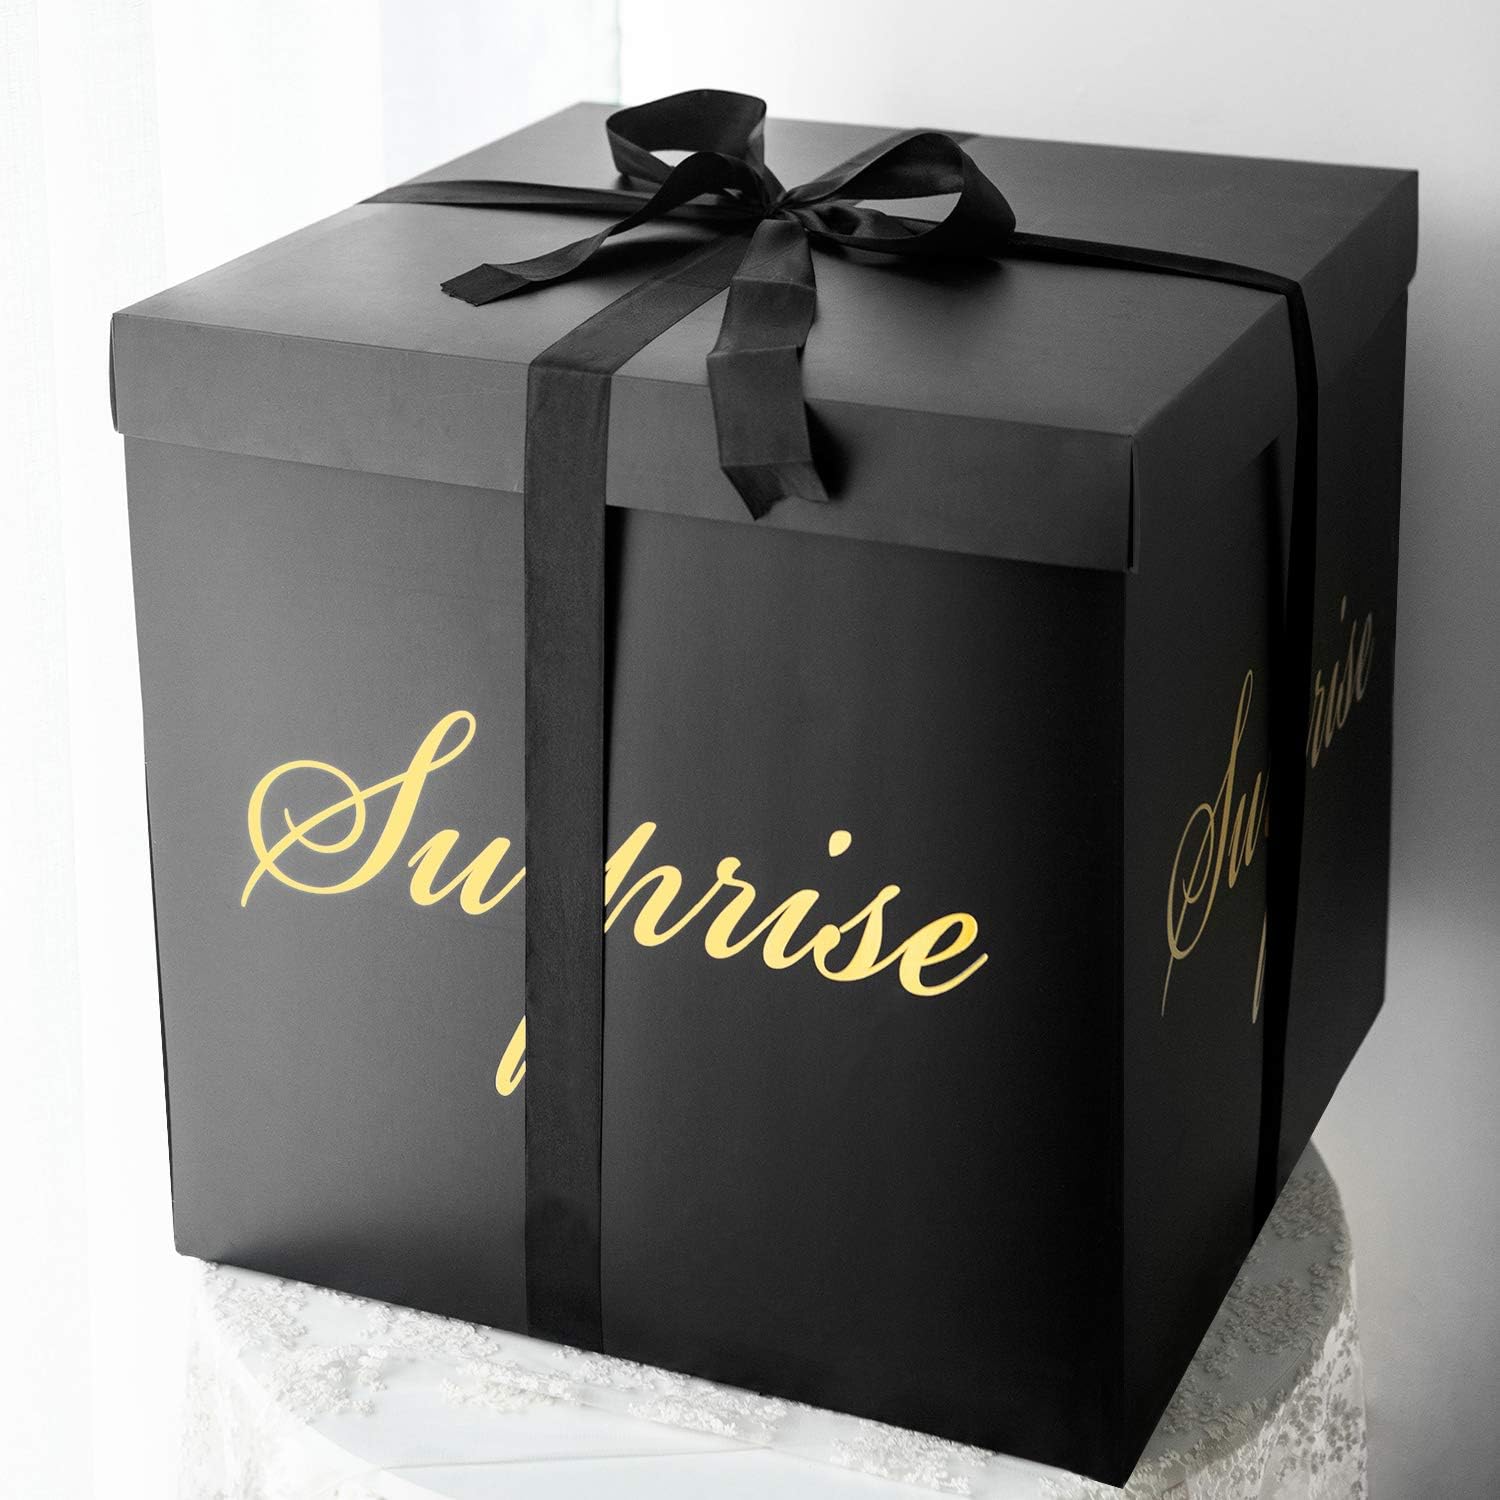 A surprise gift box